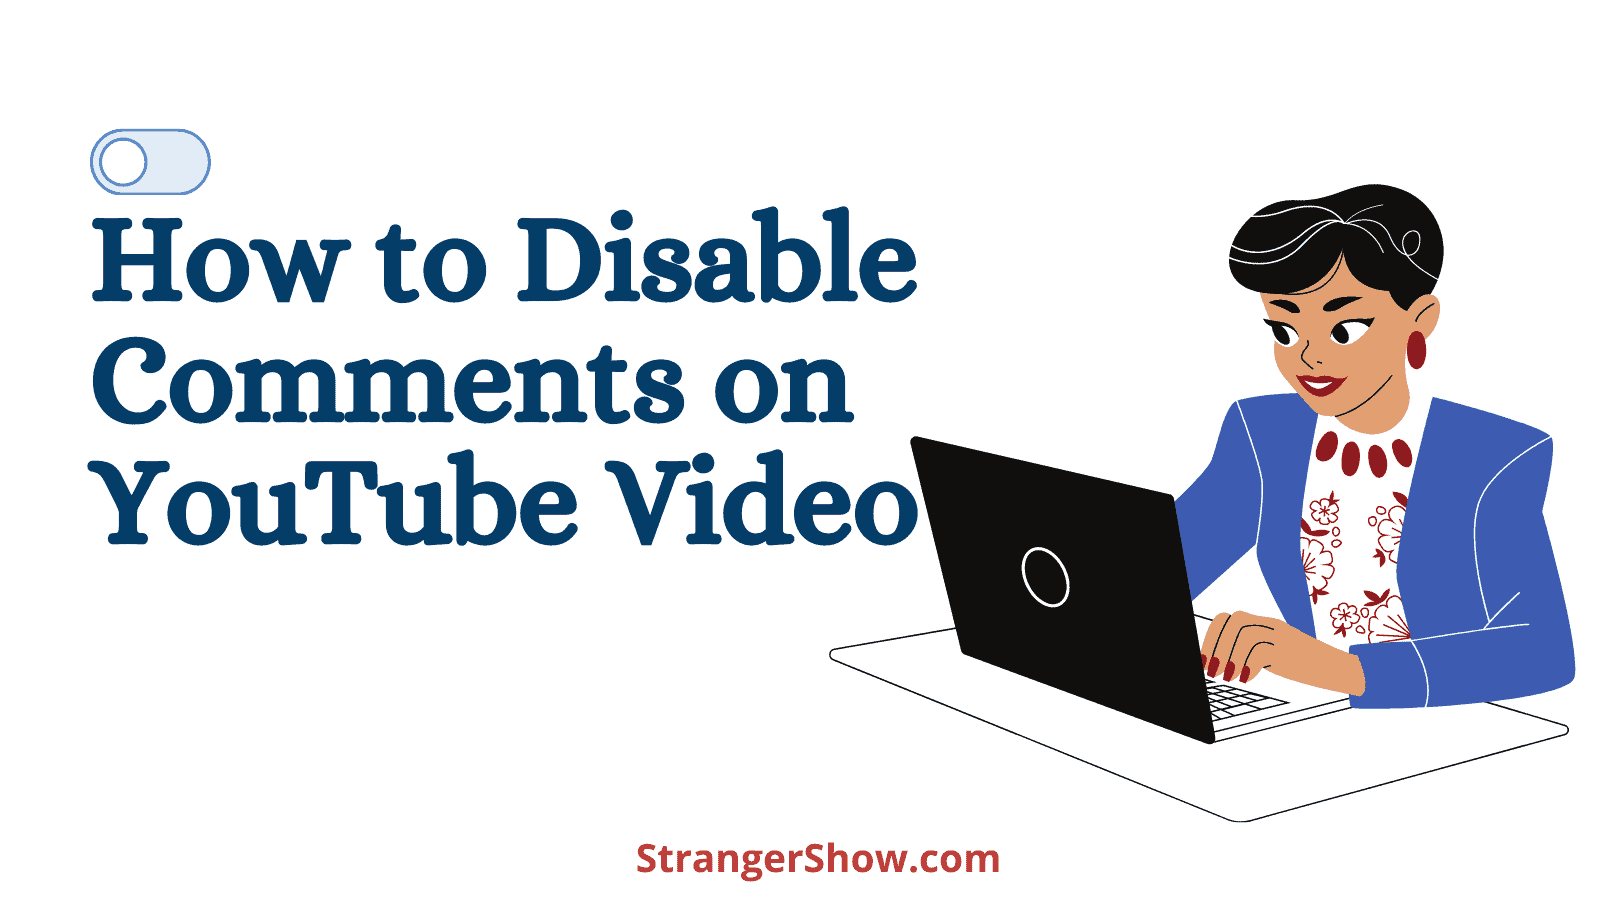 How to disable comments on YouTube videos